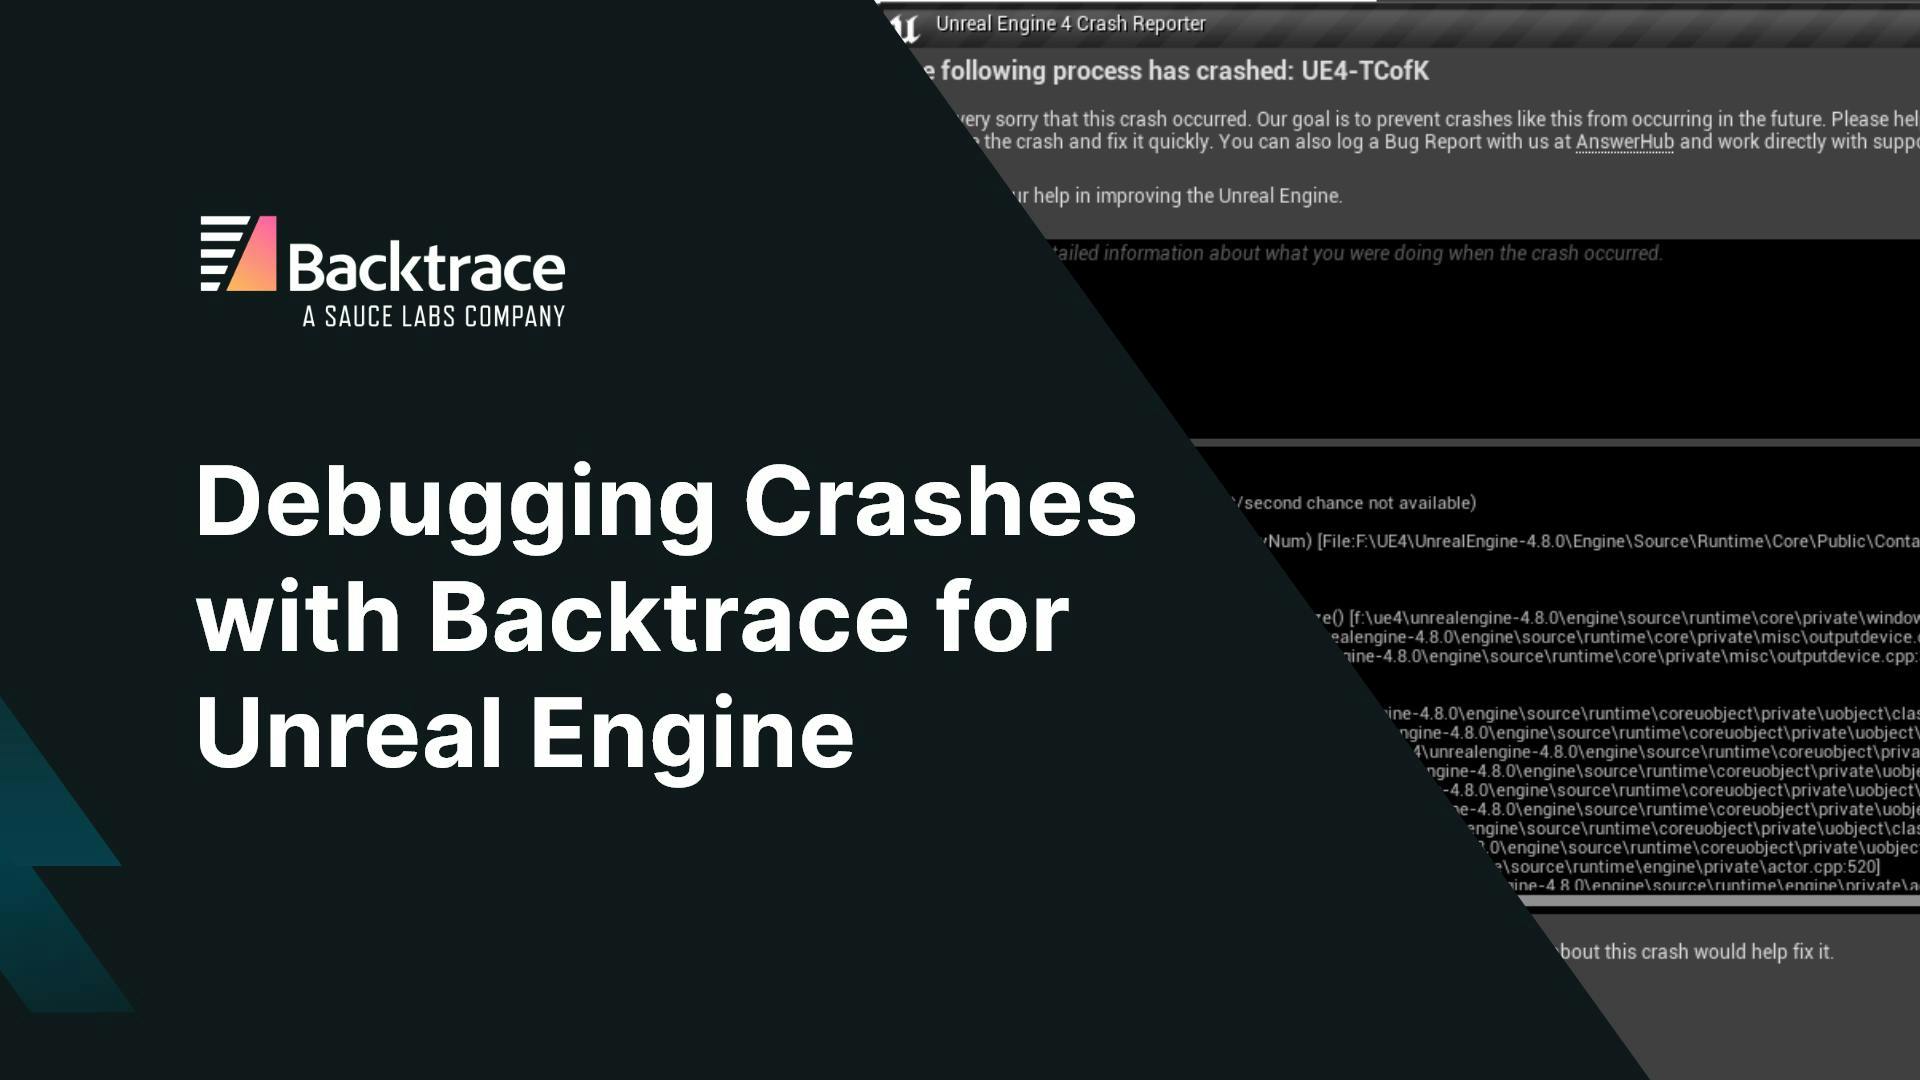 Debugging Crashes with Backtrace for Unreal Engine